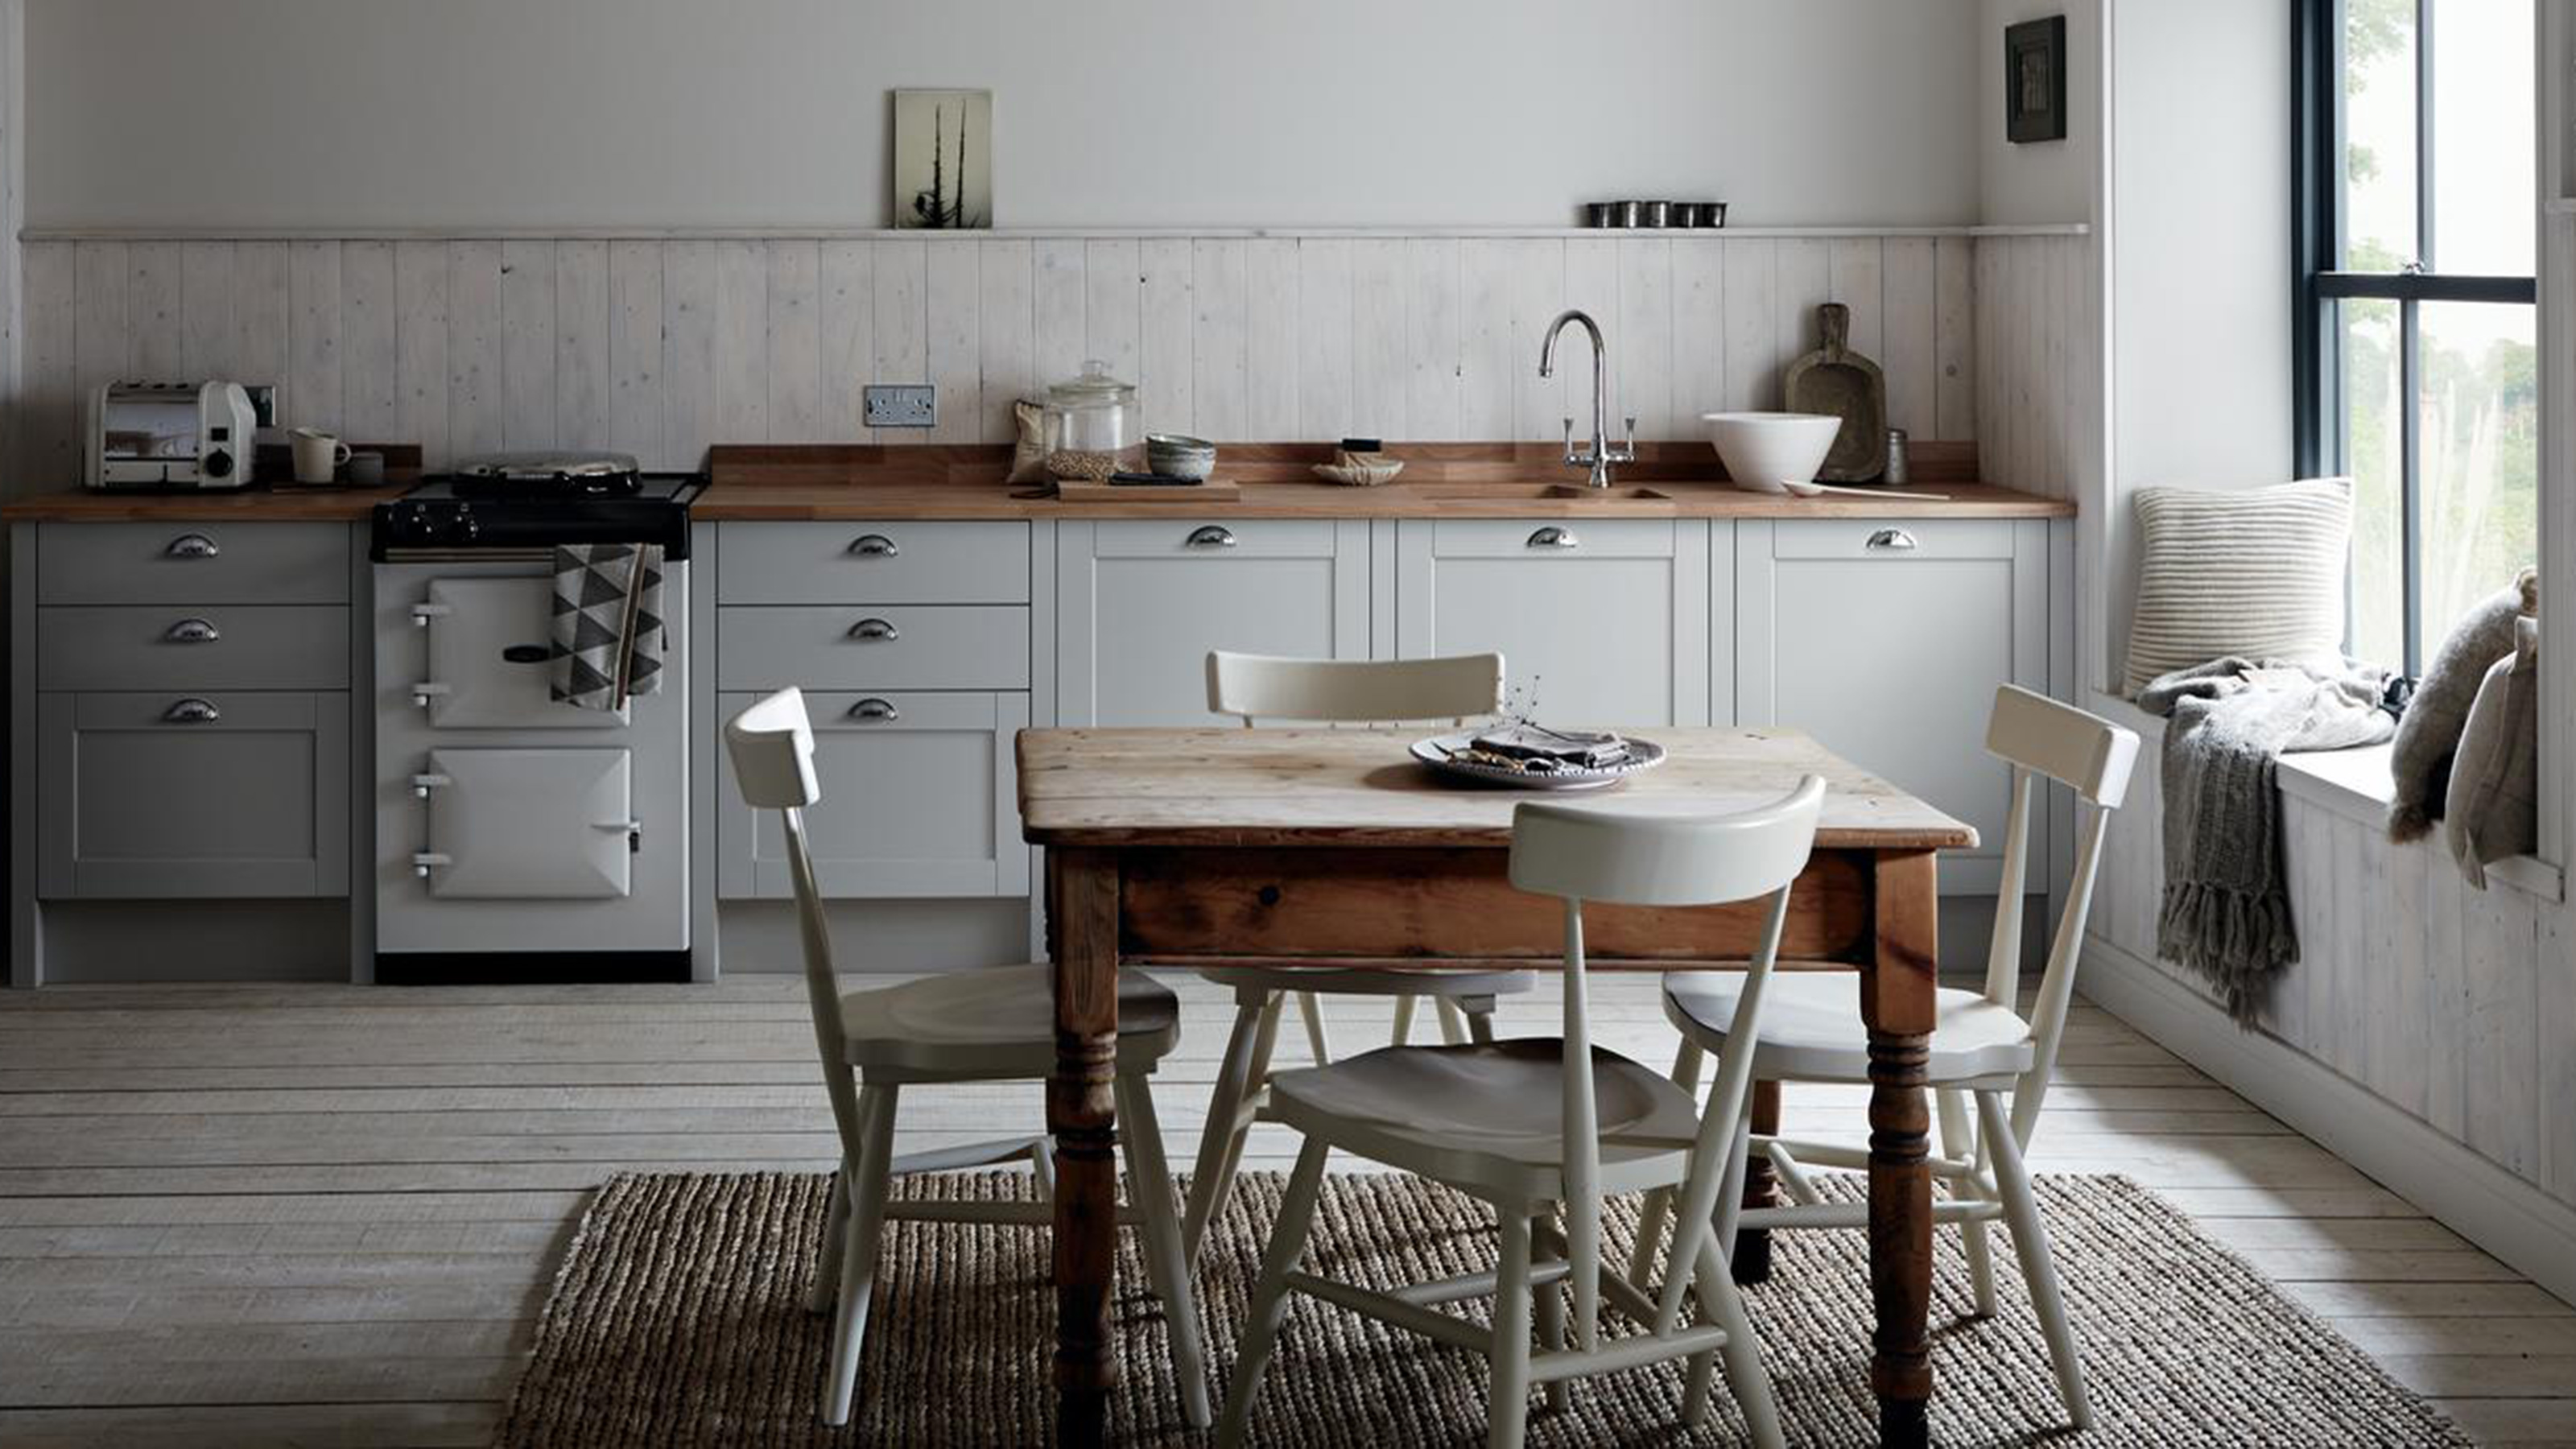 23 Country Kitchens That Feel Homey and Warm